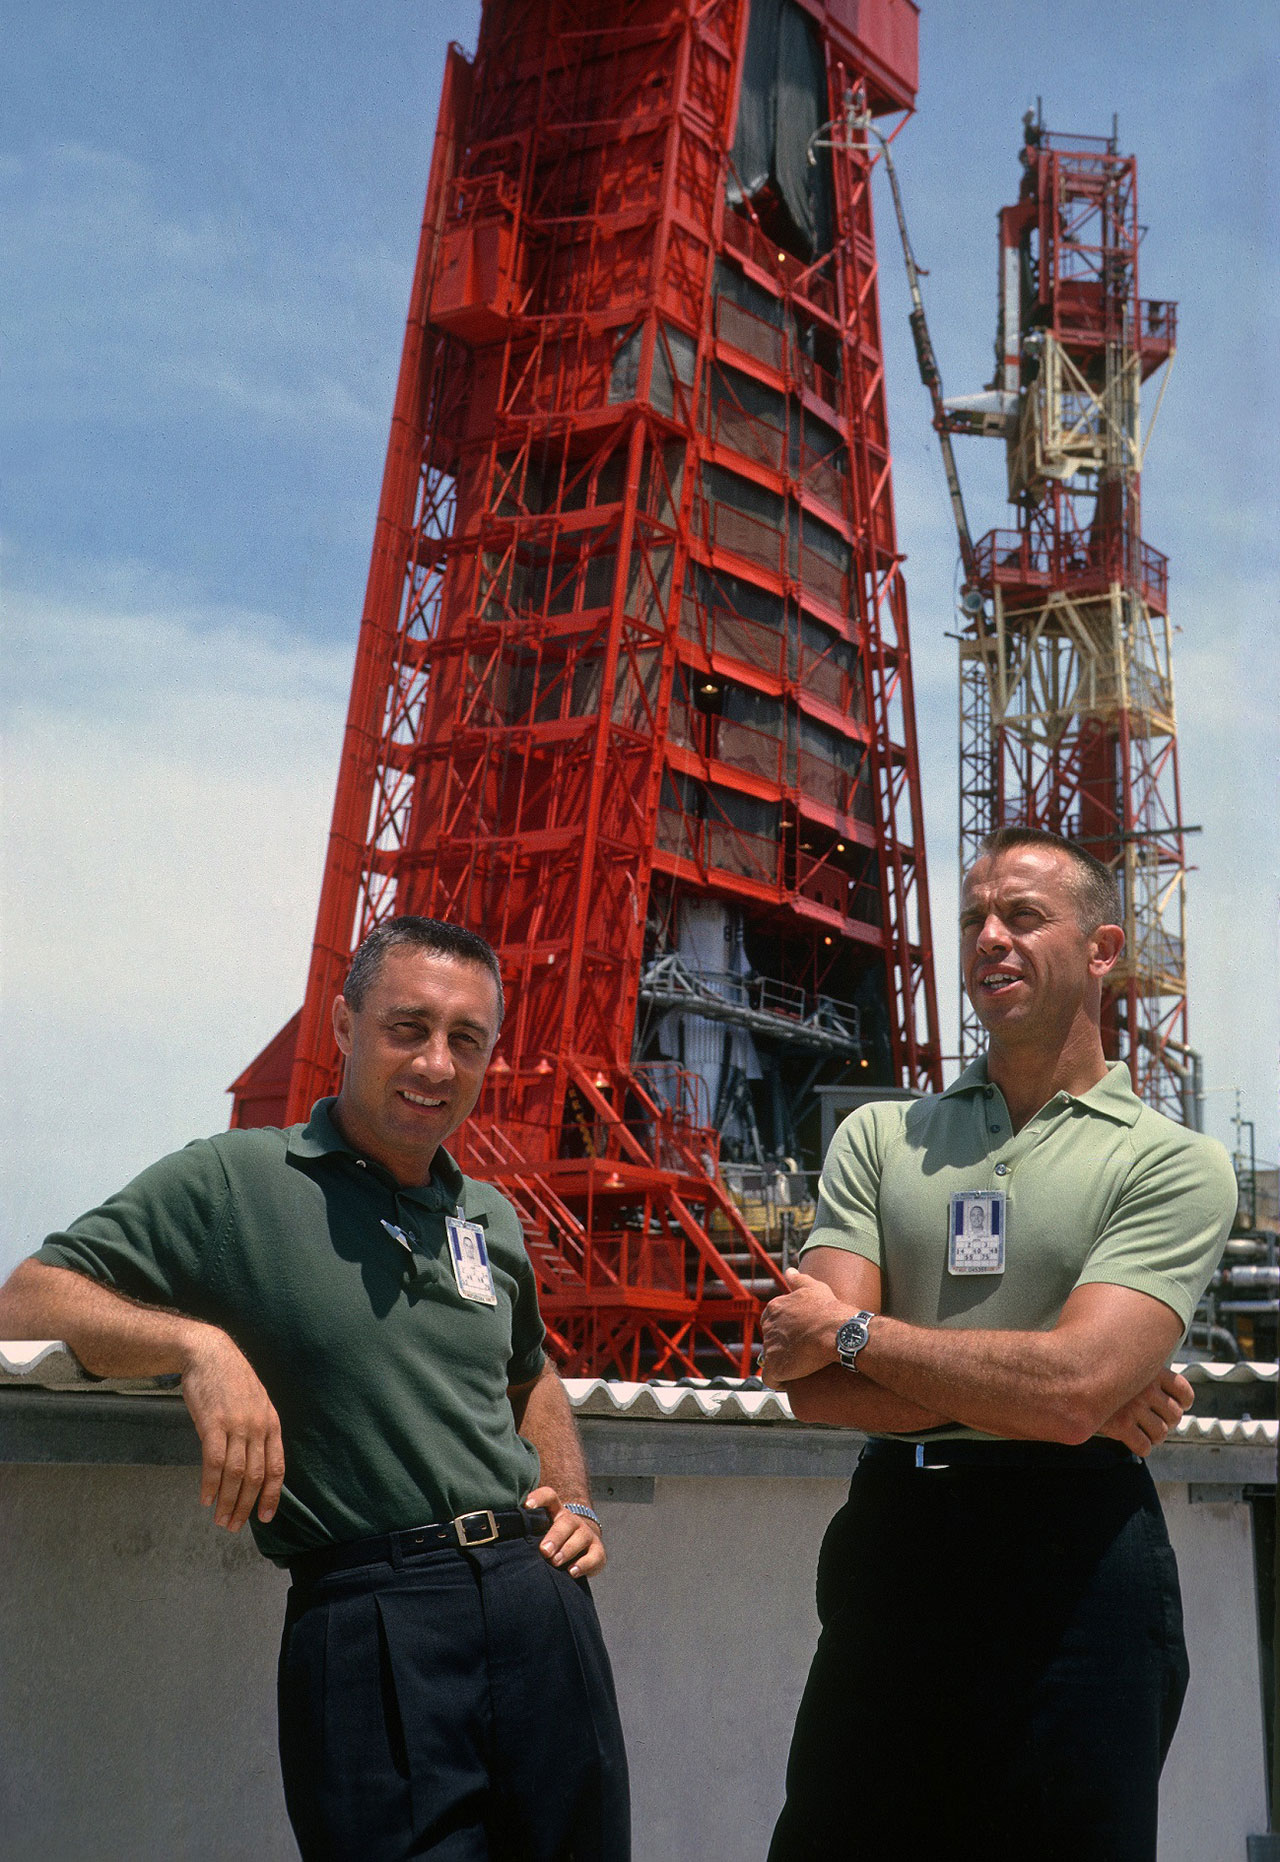 America's first two astronauts, Gus Grissom and Alan Shepard, are photographed by Bill Taub in 1961.